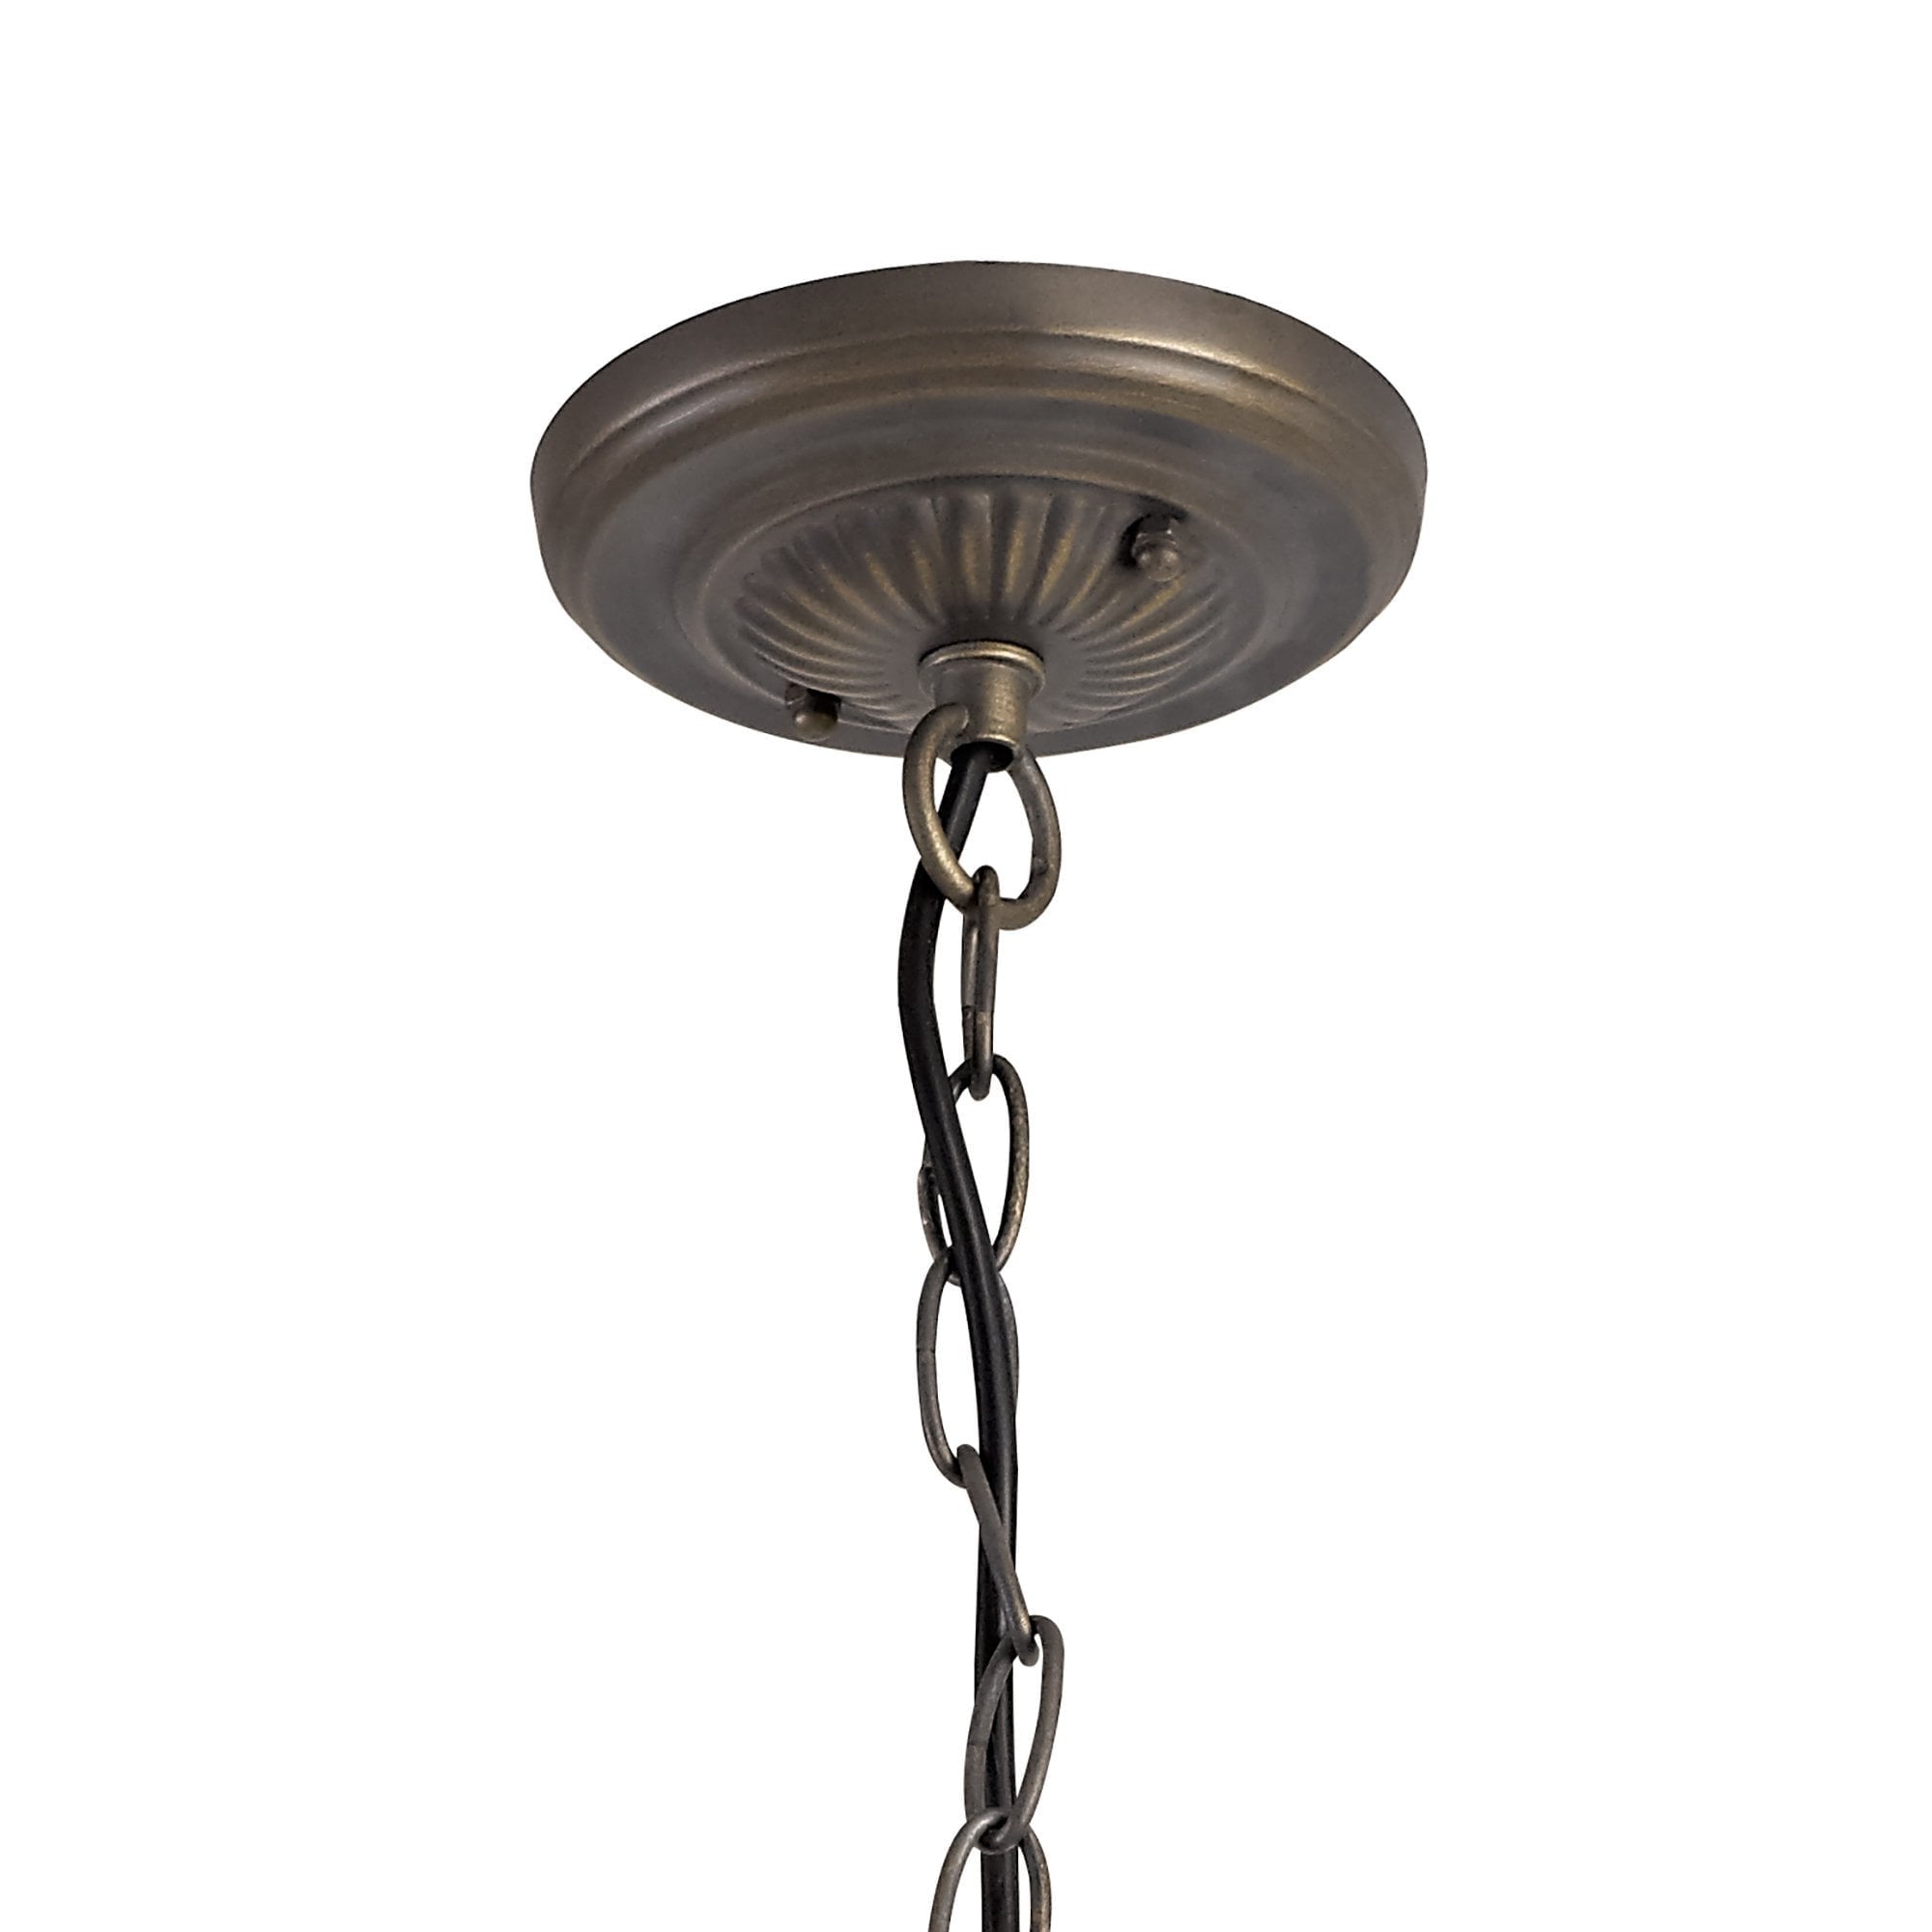 3 Light Downlighter Pendant E27 With 30cm Tiffany Shade, Grey/Cream/Crystal/Aged Antique Brass